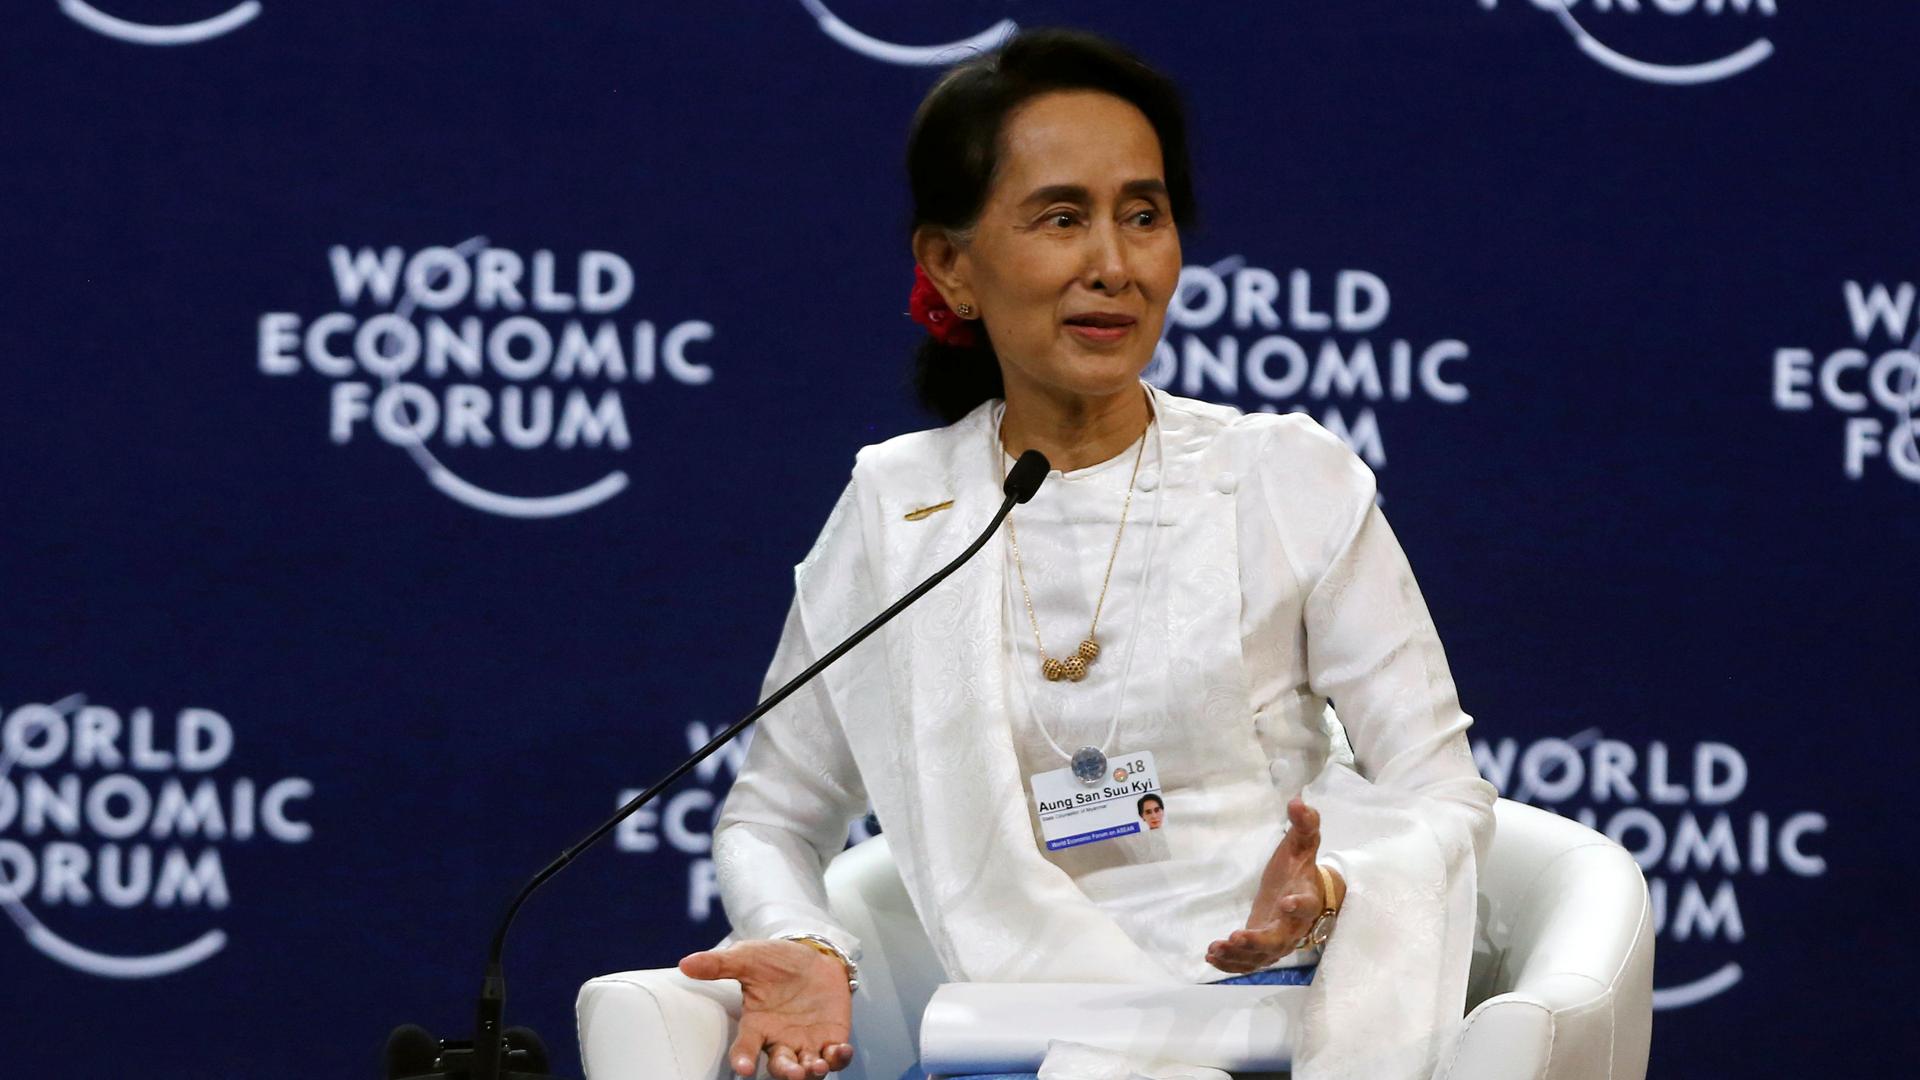 Aung San Suu Kyi  on a stage dressed in white